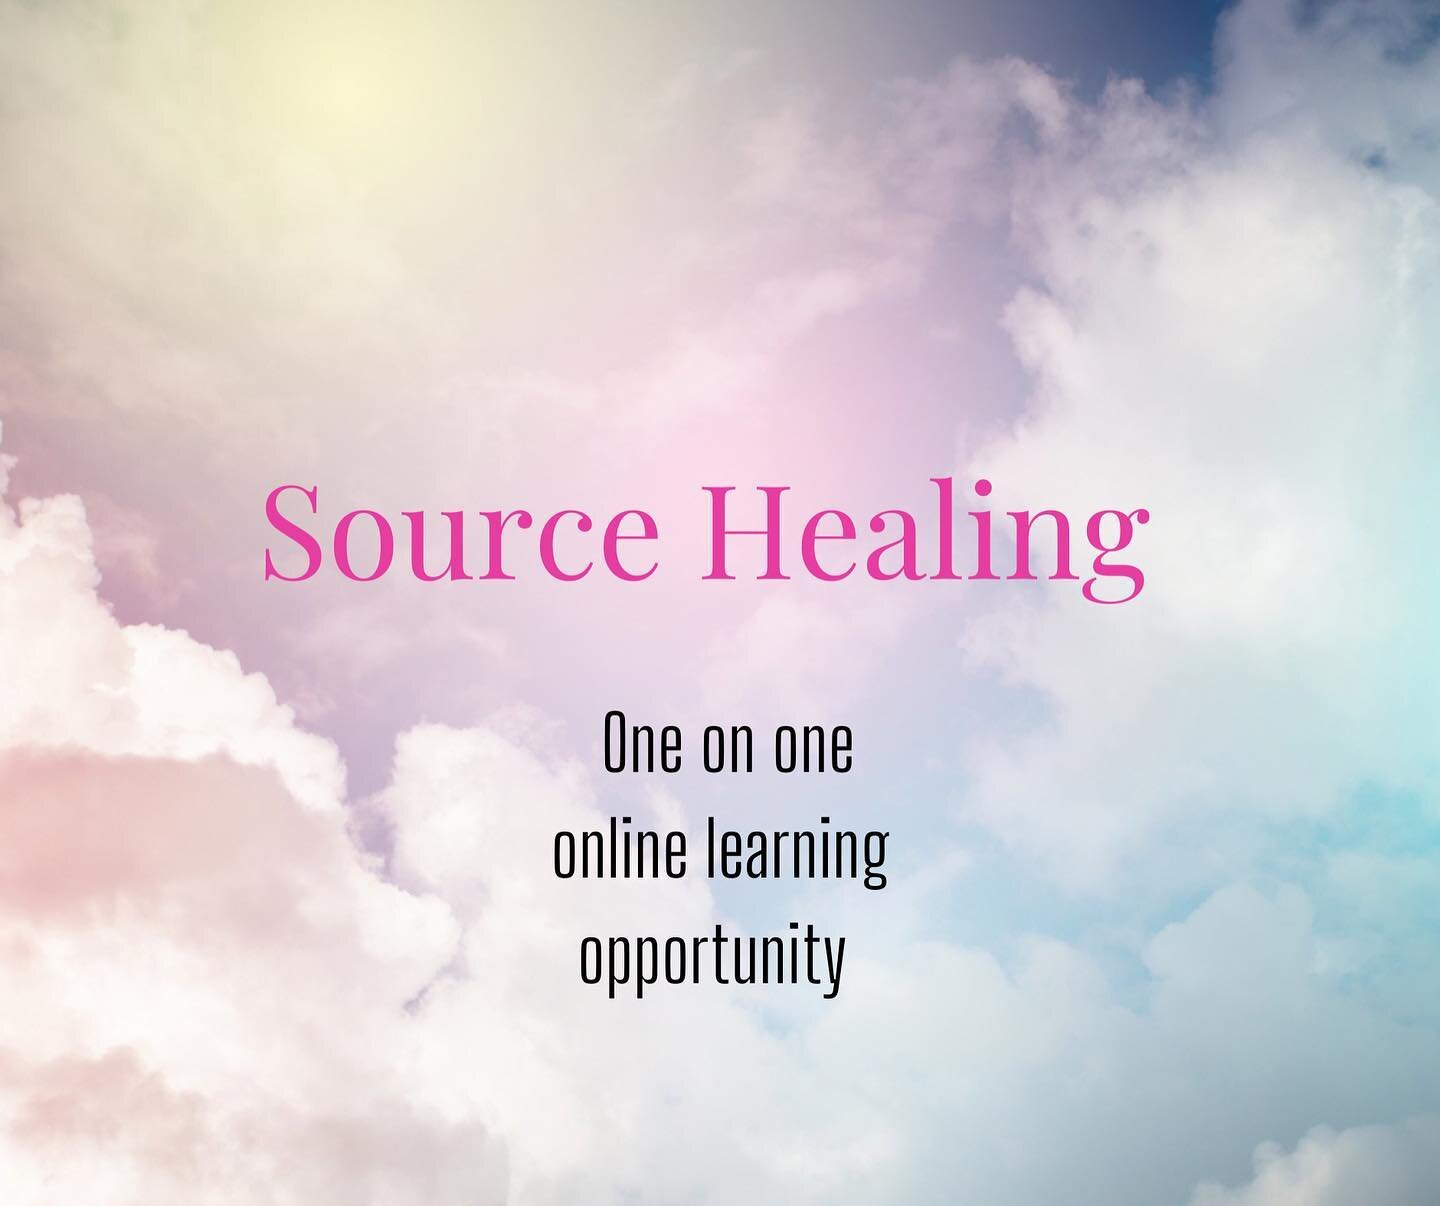 If you&rsquo;d like to learn Source Healing Technique and you can&rsquo;t get to an in-person course, I&rsquo;m now offering a one on one online learning option. We meet for 90 minutes per week over 4 weeks and you&rsquo;ll have some homework to do i